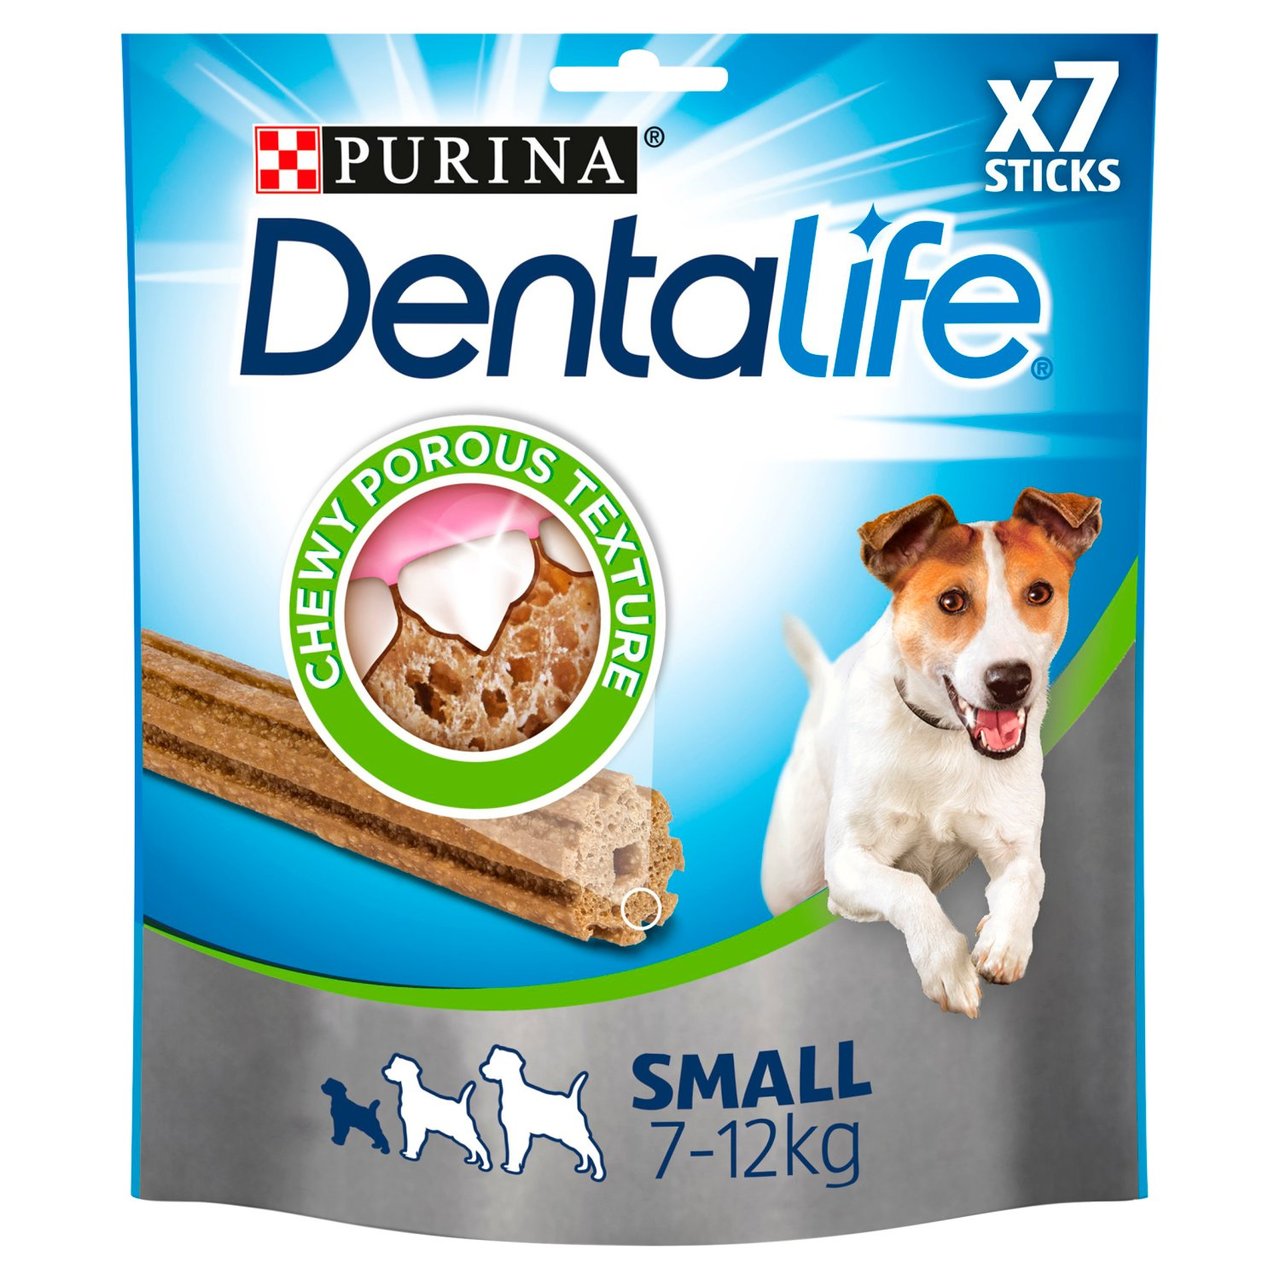 An image of Dentalife Small Dog Dental Chew